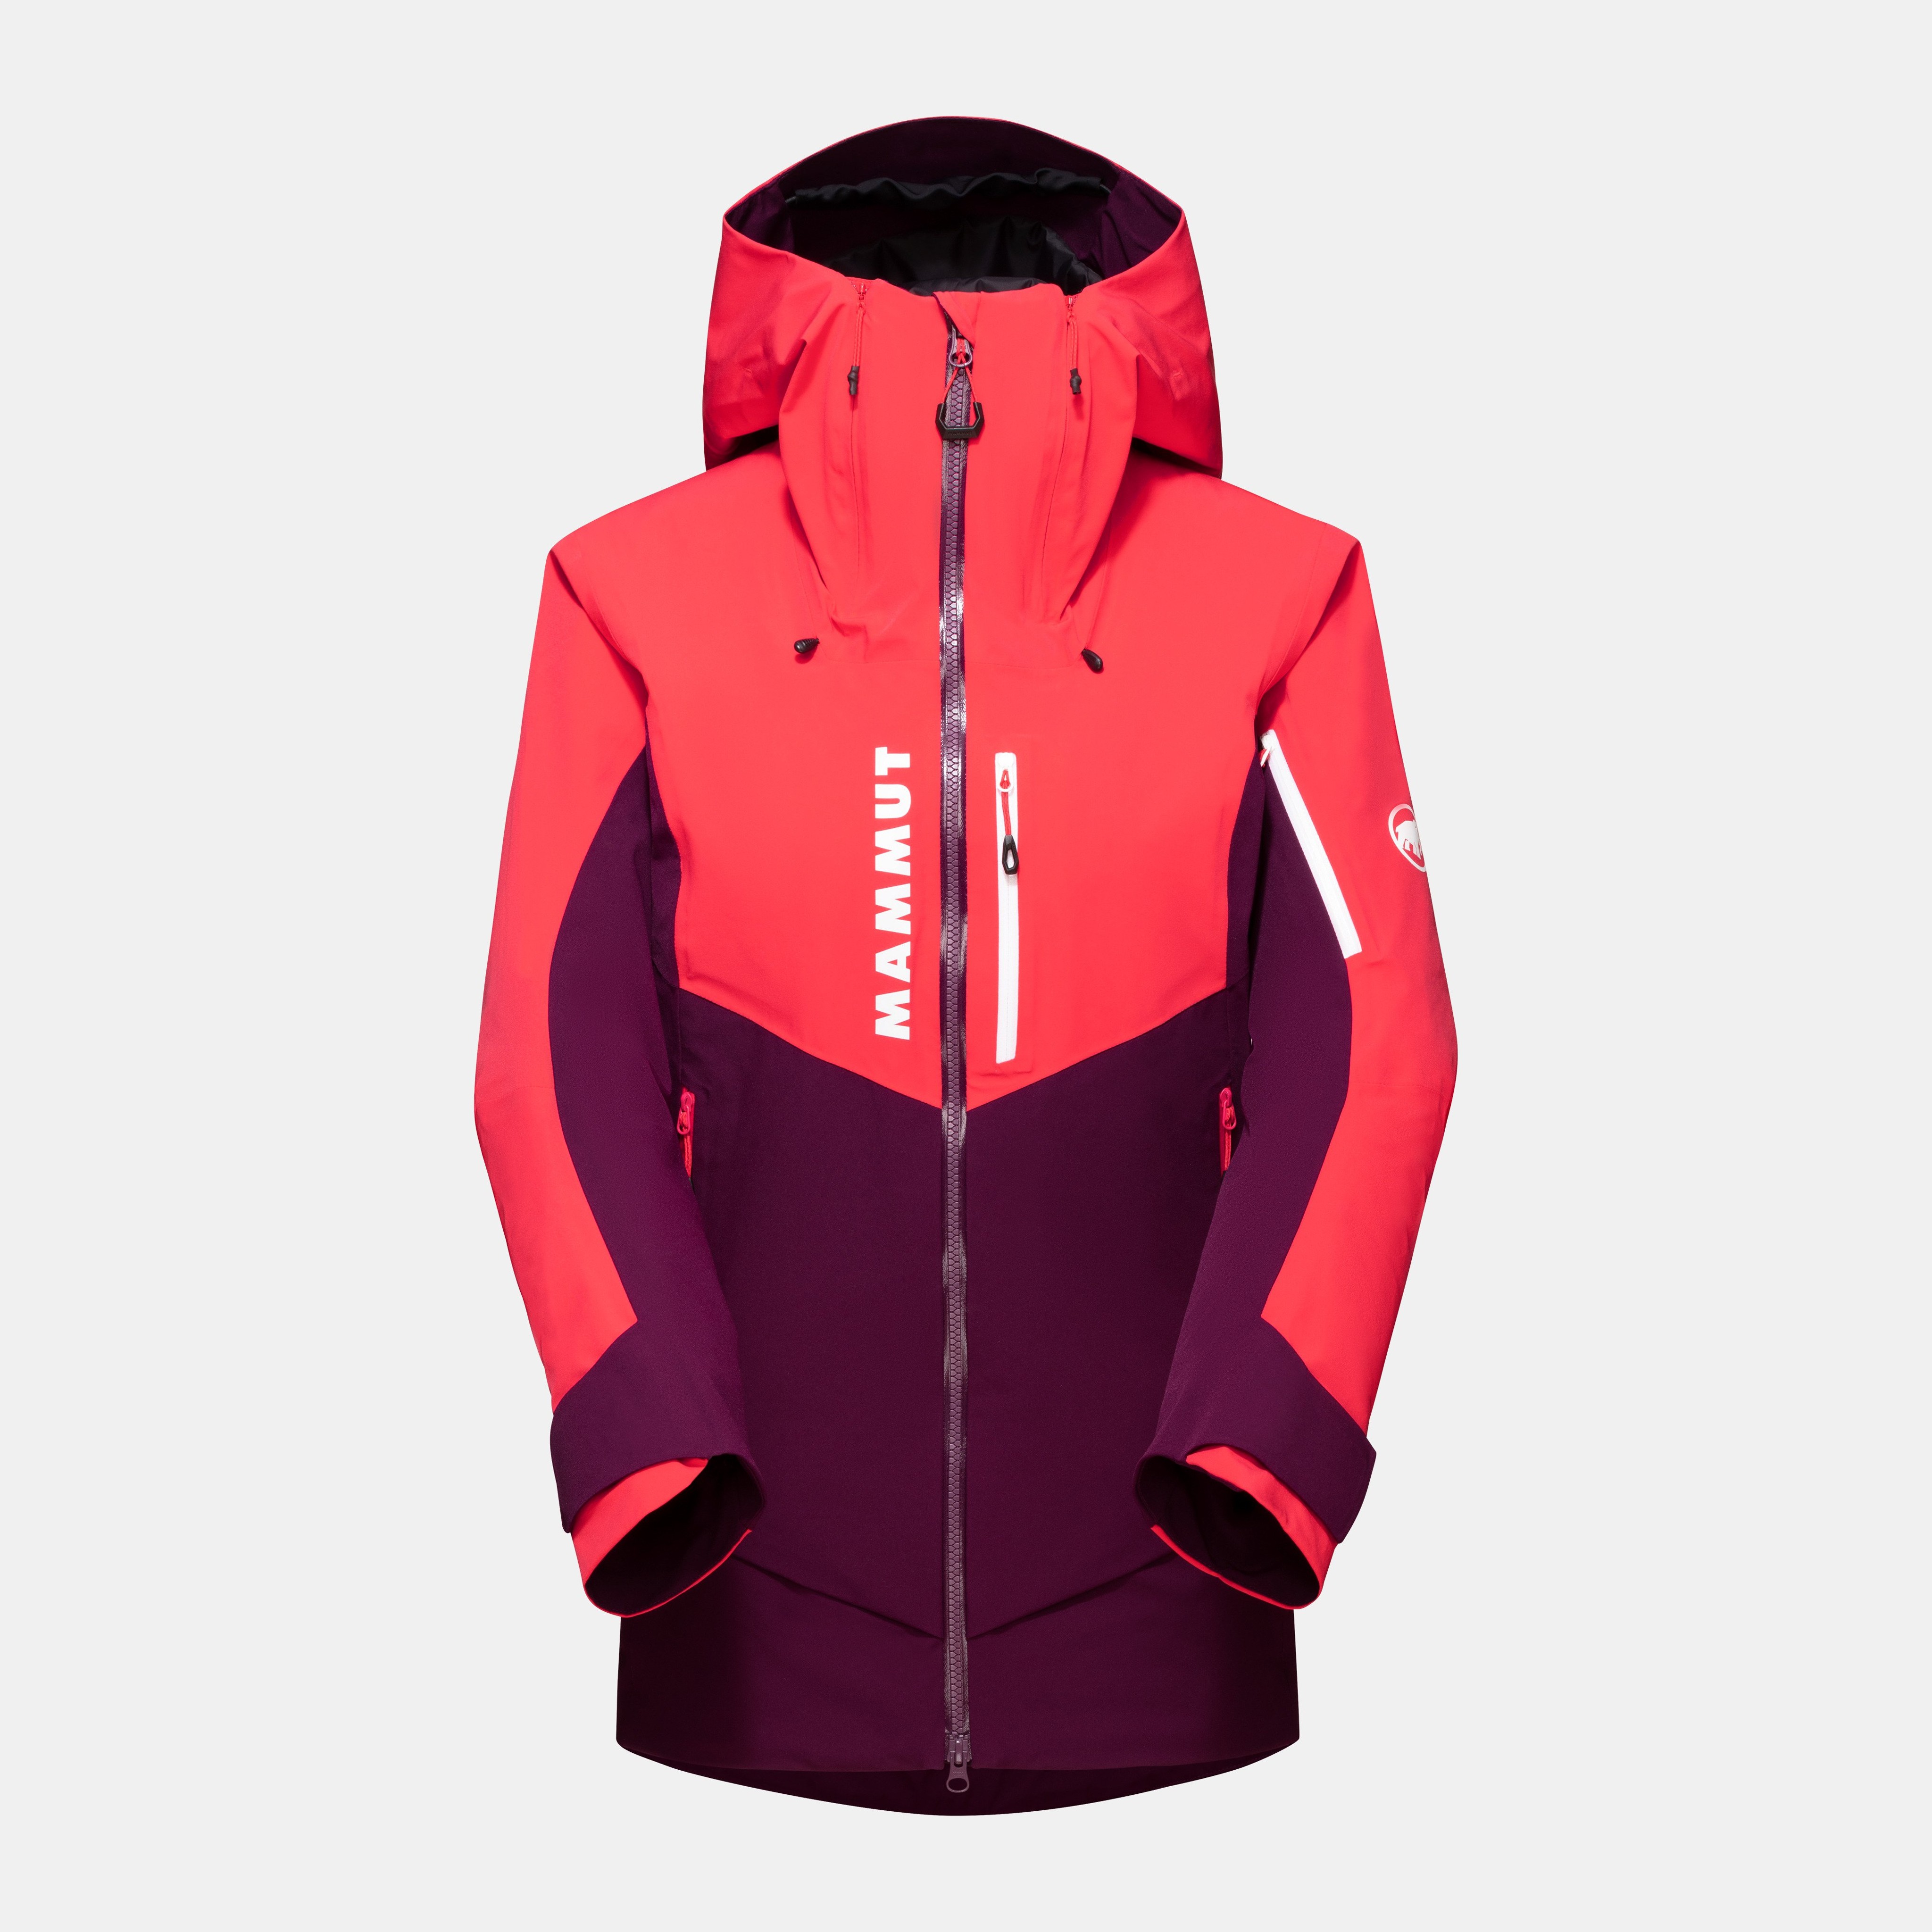 La Liste HS Thermo Hooded Jacket Women product image